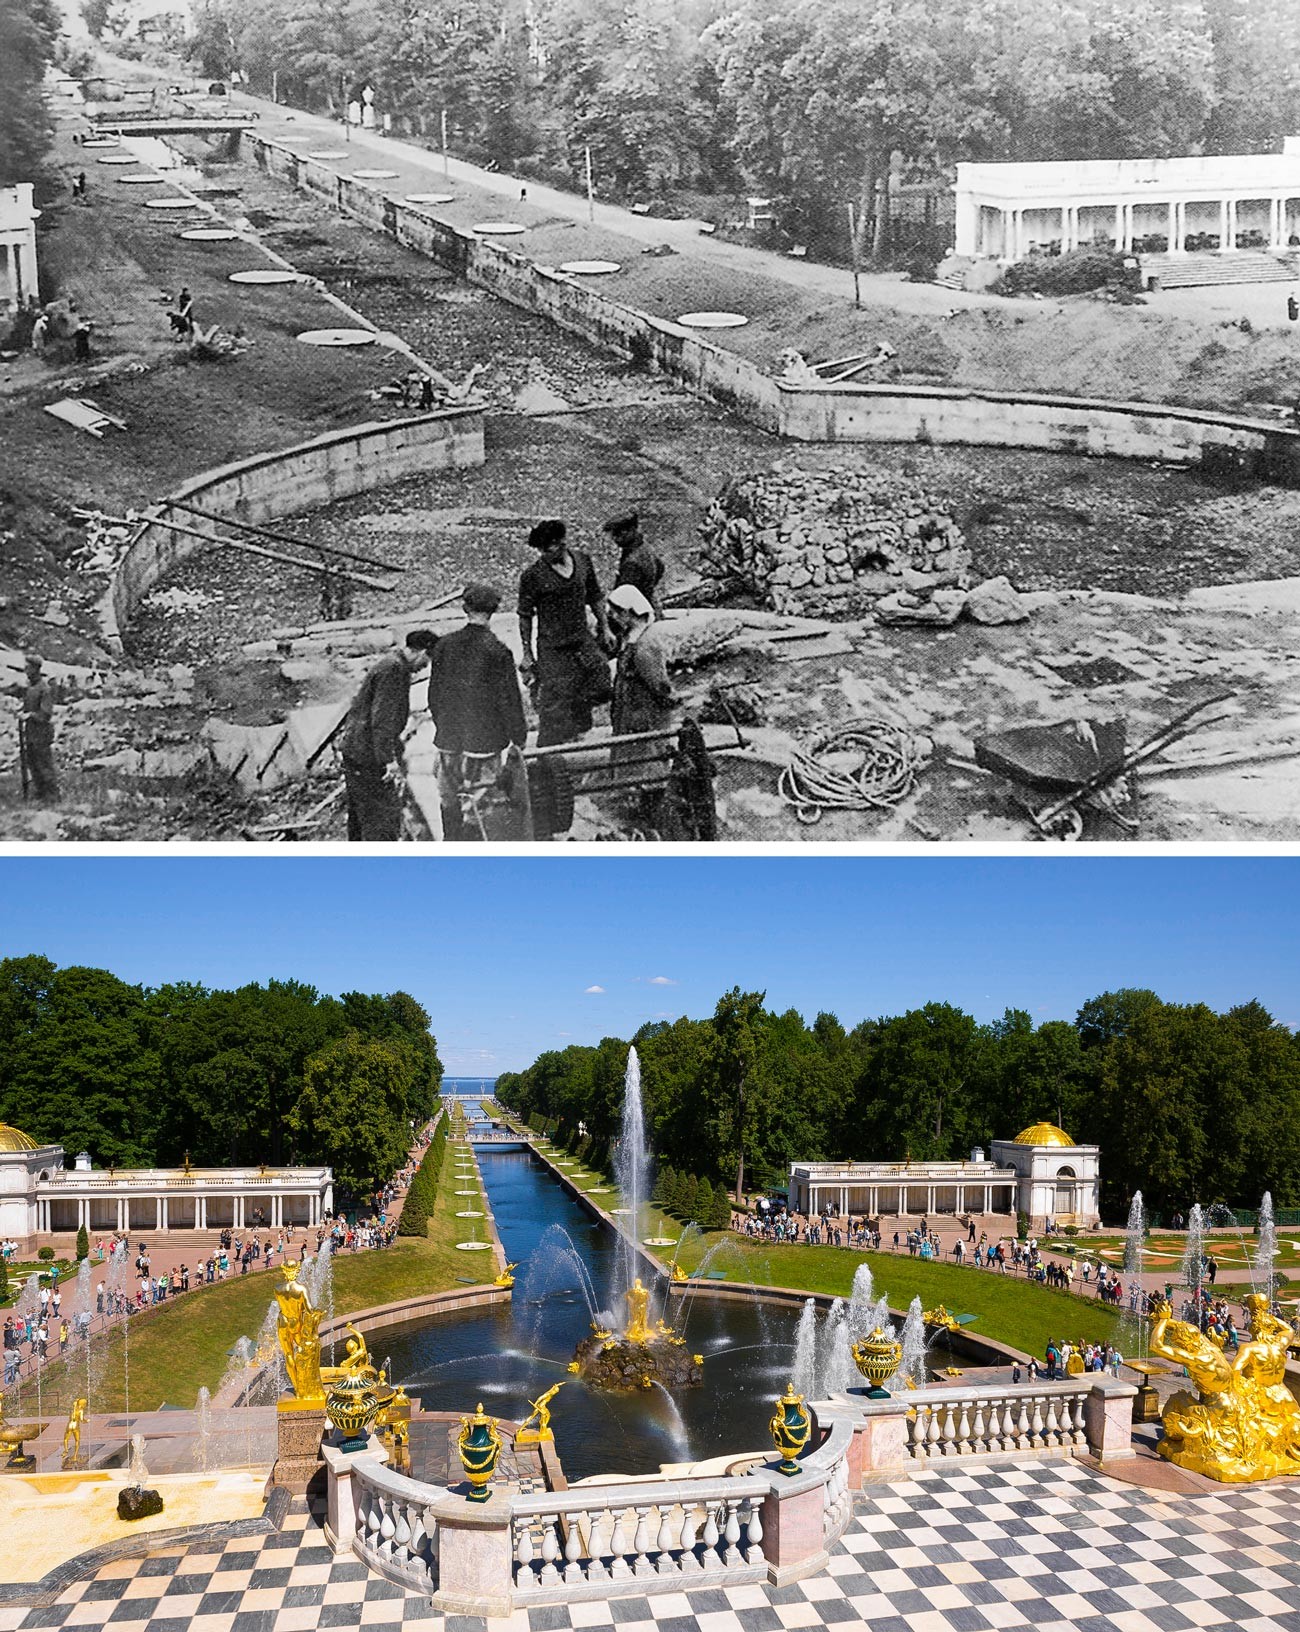 The Grand Cascade fountain in 1946 and now